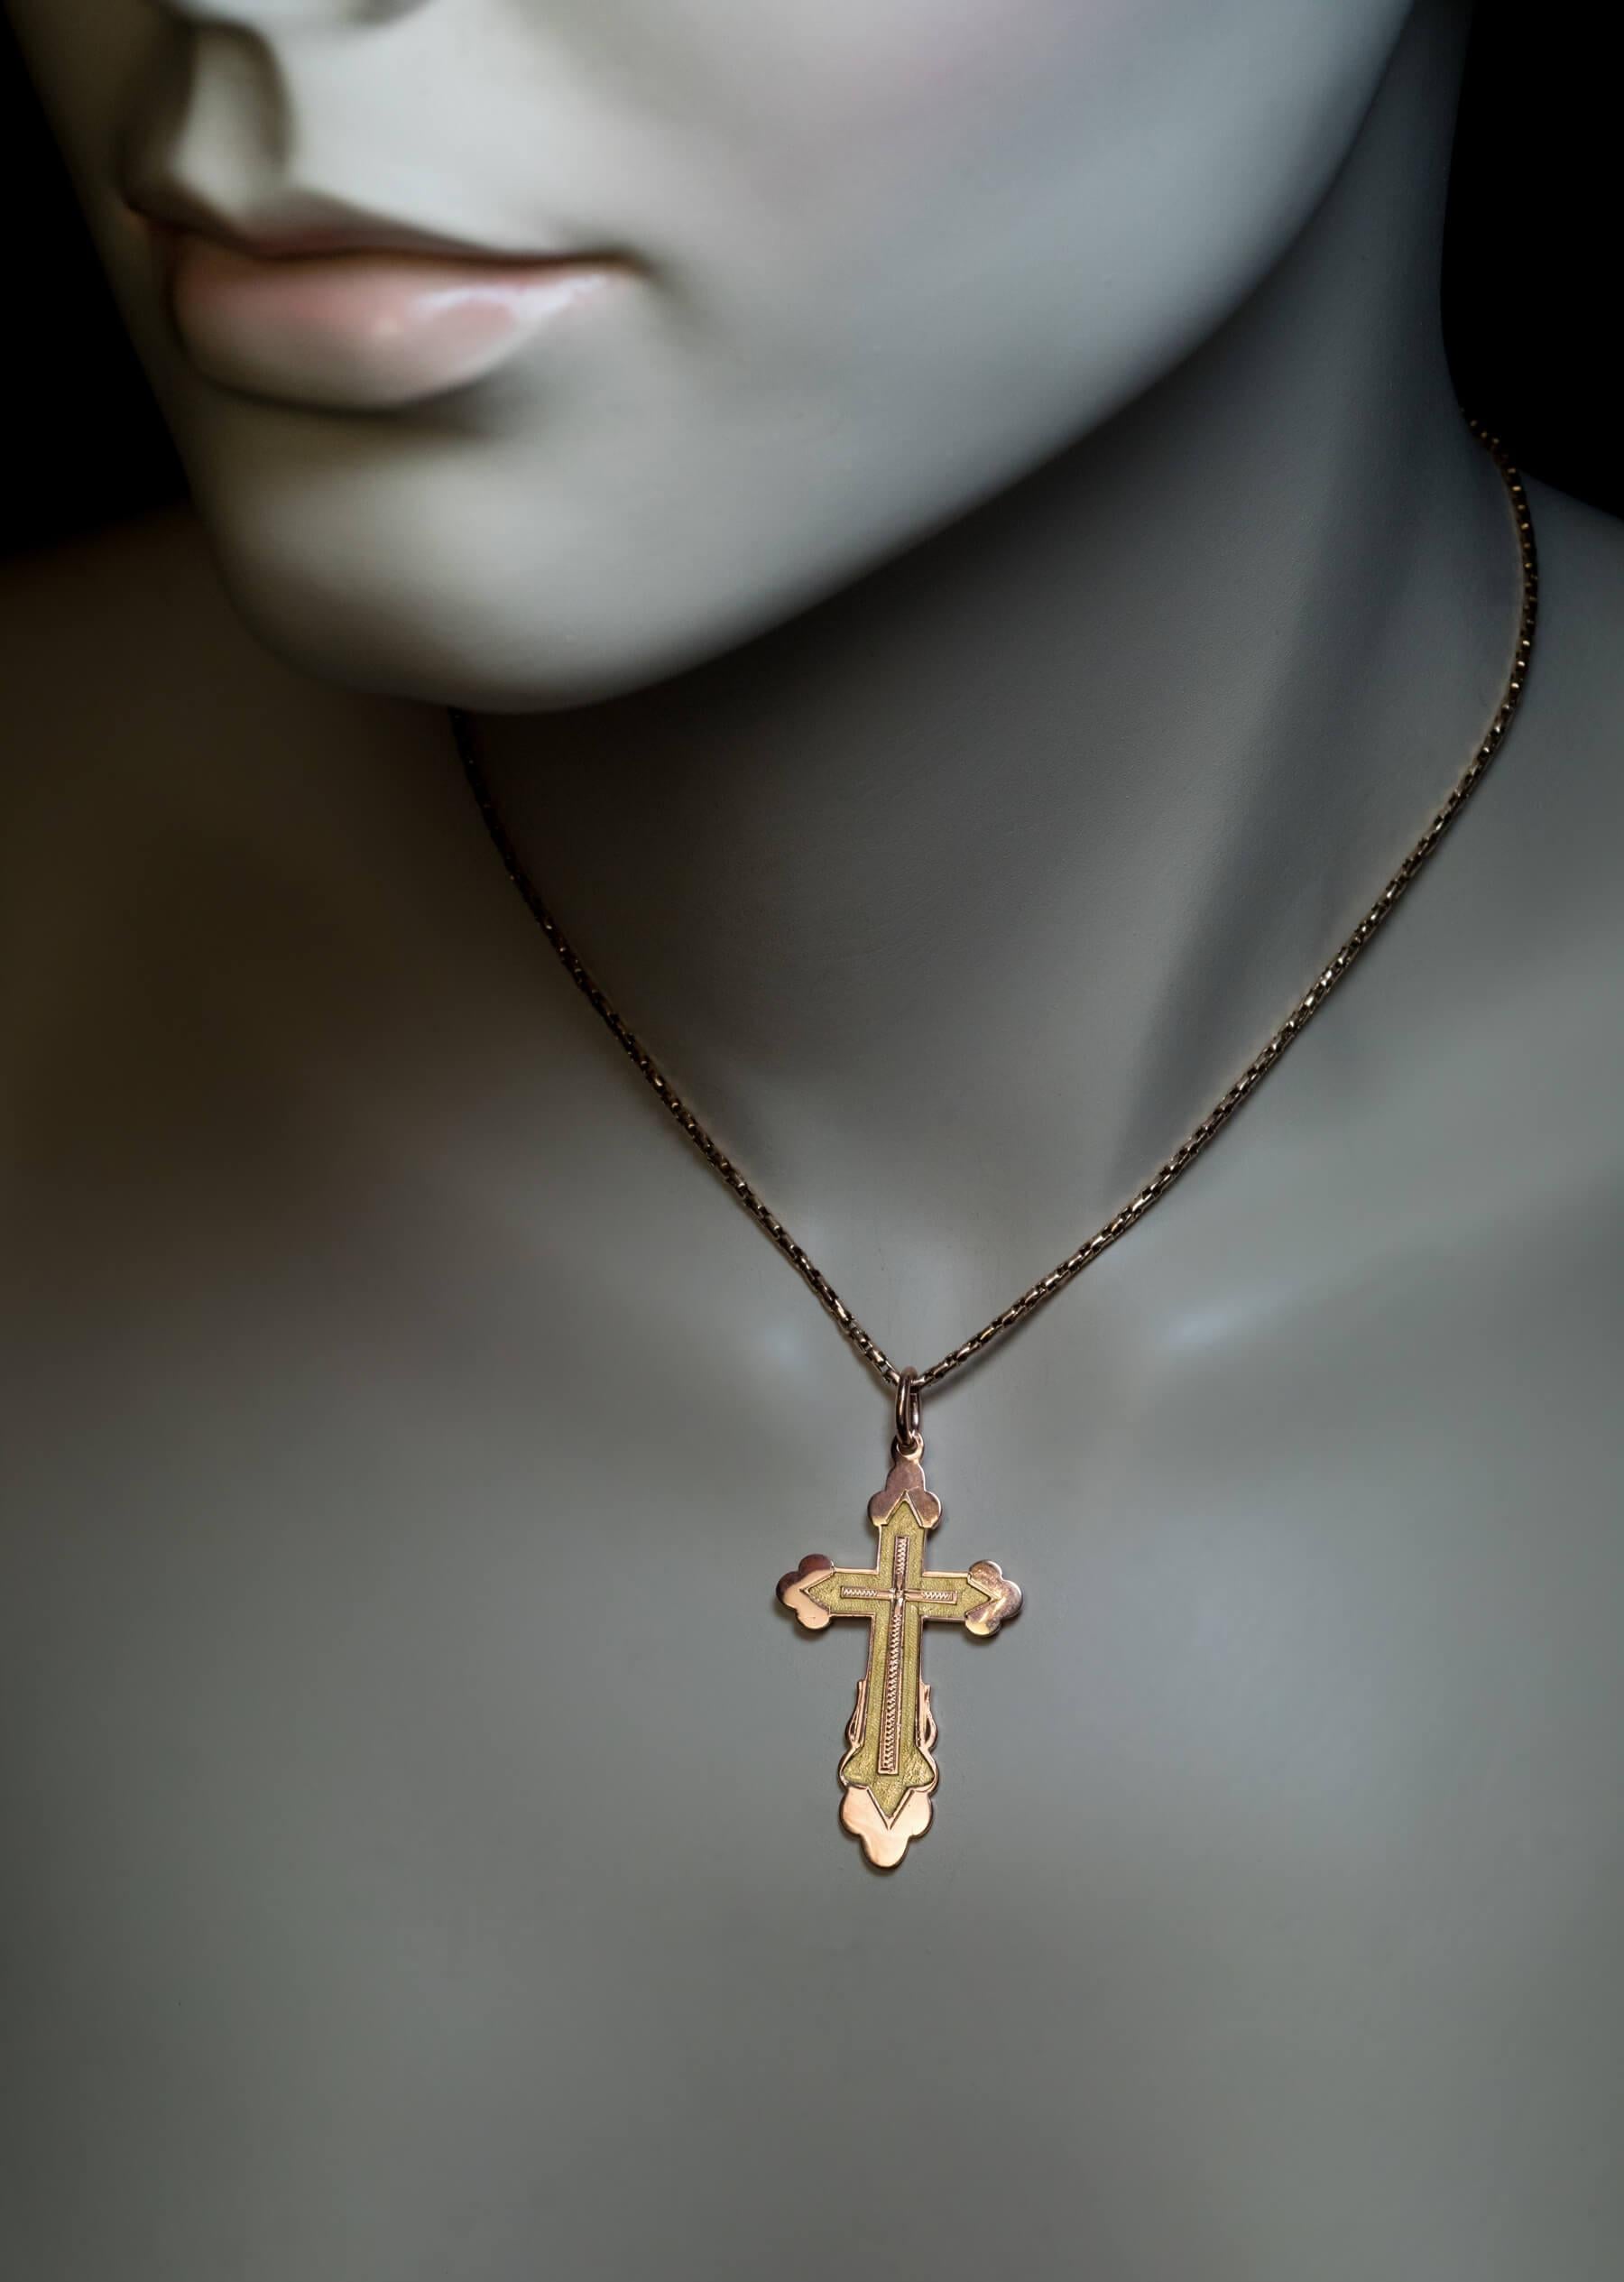 Made in Moscow between 1908 and 1917.  The cross is finely crafted in polished rose and textured yellow 14K gold.  The engraved inscription on the back in Old Slavonic script reads: SAVE AND PROTECT.  Marked with maker’s initials, 56 zolotnik old